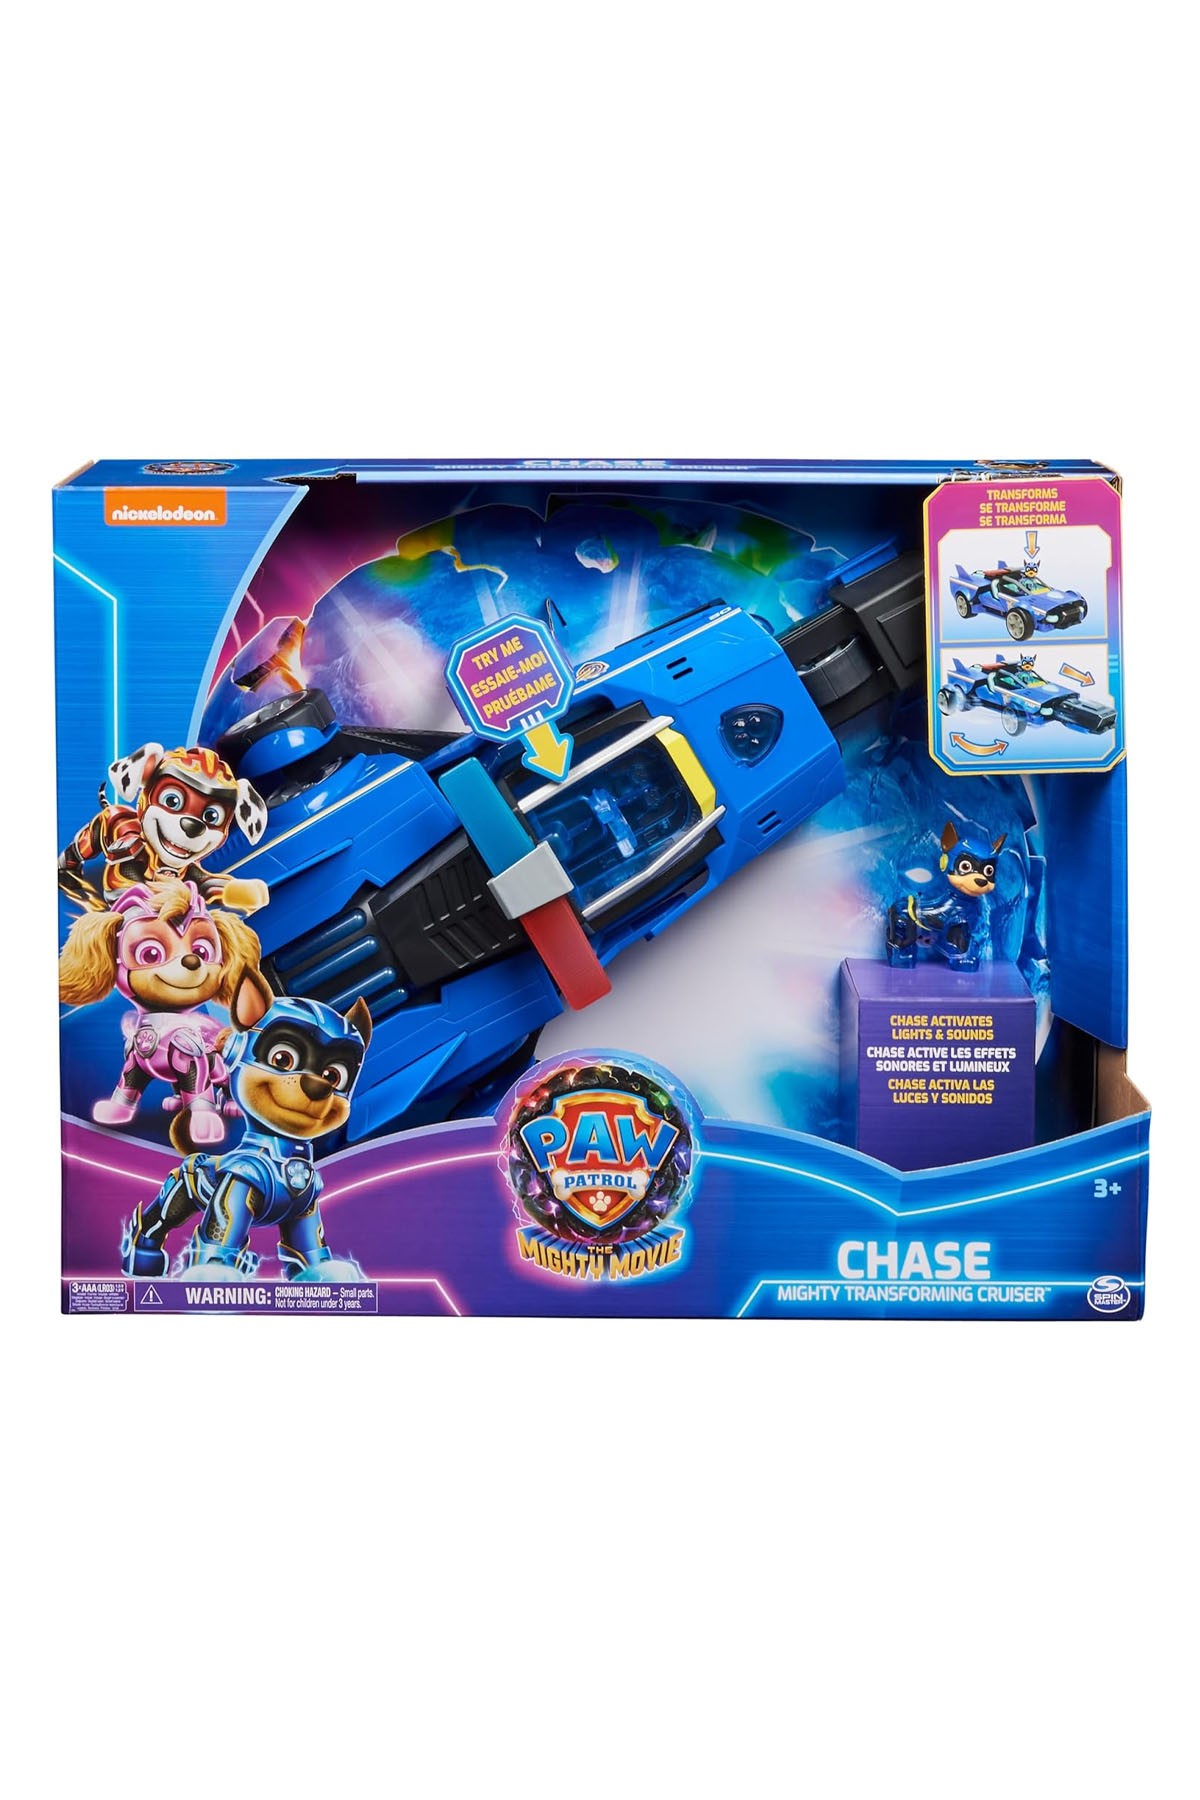 Paw Patrol The Mighty Movie Chase'in Delüks Aracı